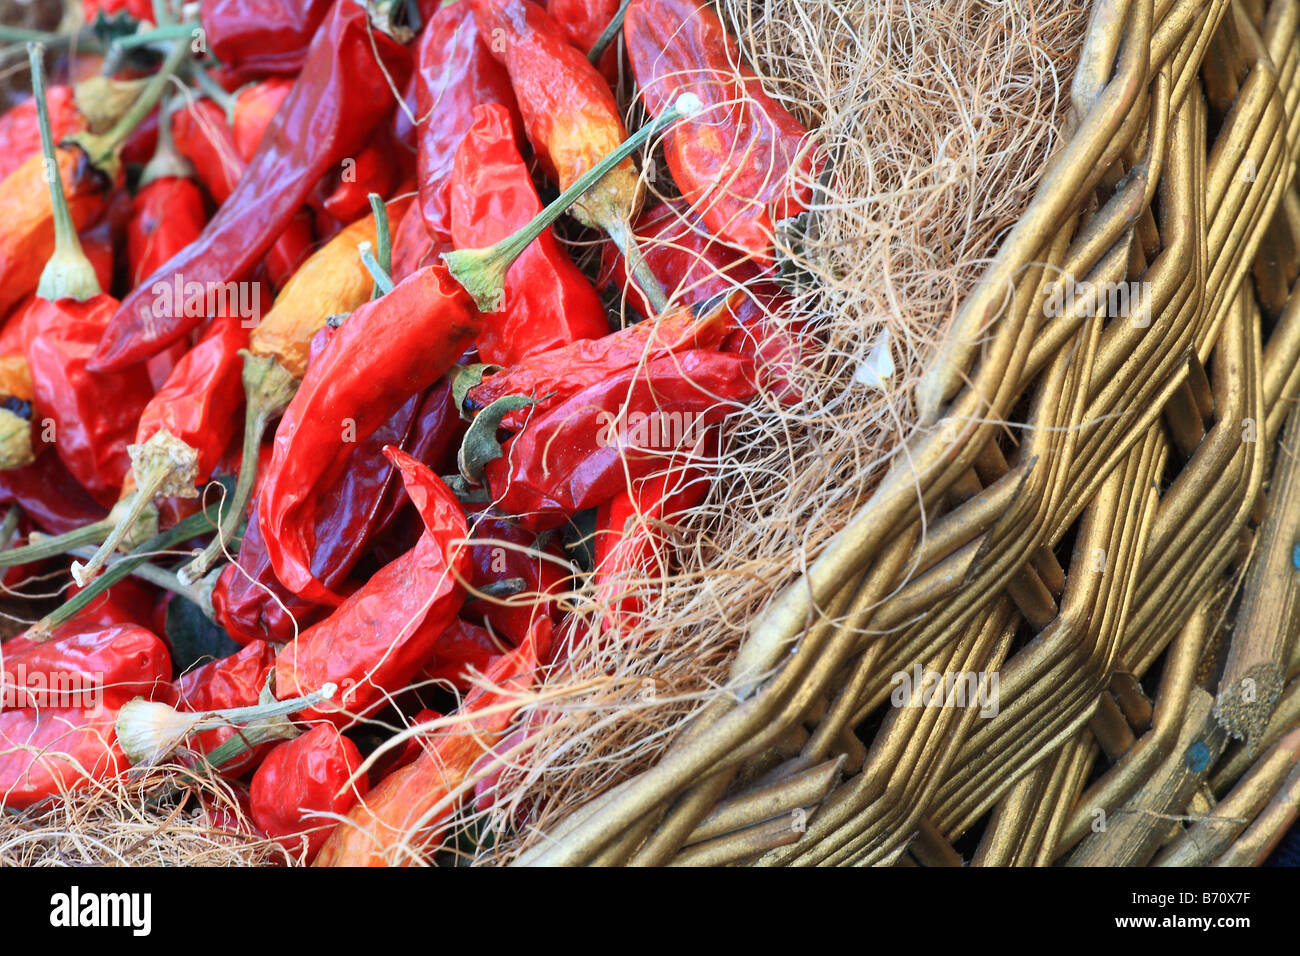 Red chillies in the basket Stock Photo